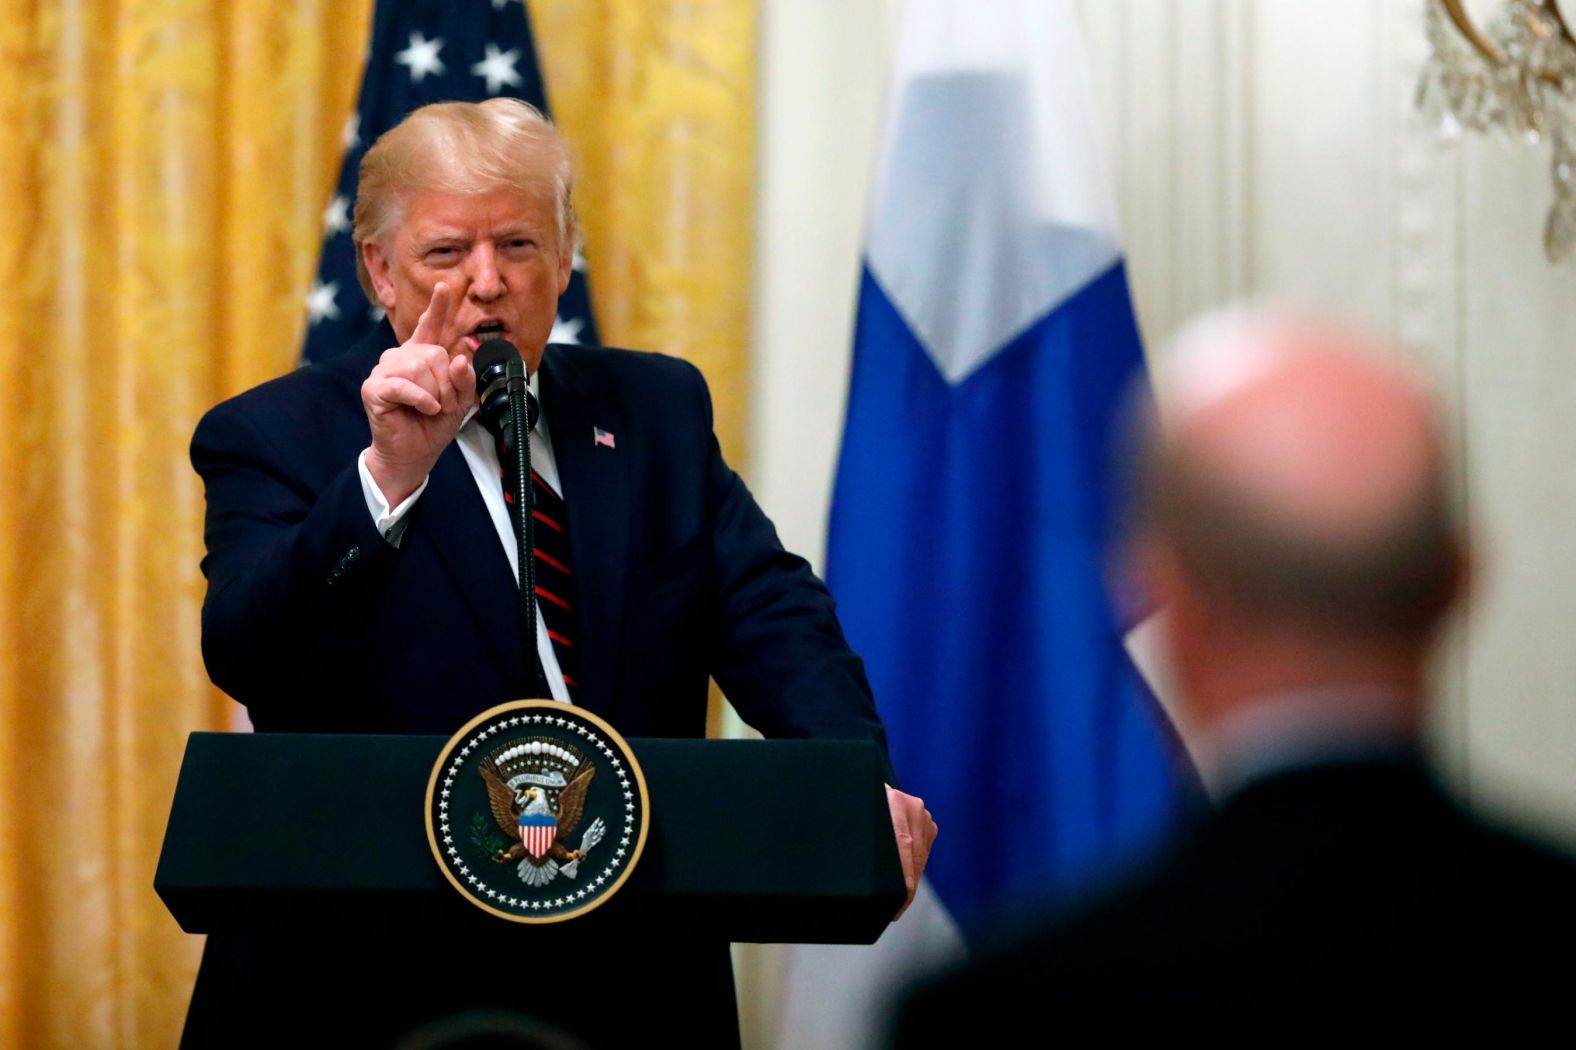 Trump was asked about the scandal during a White House news conference on October 2. "The whistleblower is very inaccurate," Trump said. <a href="index.php?page=&url=https%3A%2F%2Fwww.cnn.com%2F2019%2F10%2F02%2Fpolitics%2Fpresident-donald-trump-impeachment-democrats-pompeo%2Findex.html" target="_blank">He vented to the press</a> with the visiting Finnish President in attendance. "This is a fraudulent crime on the American people," Trump said.